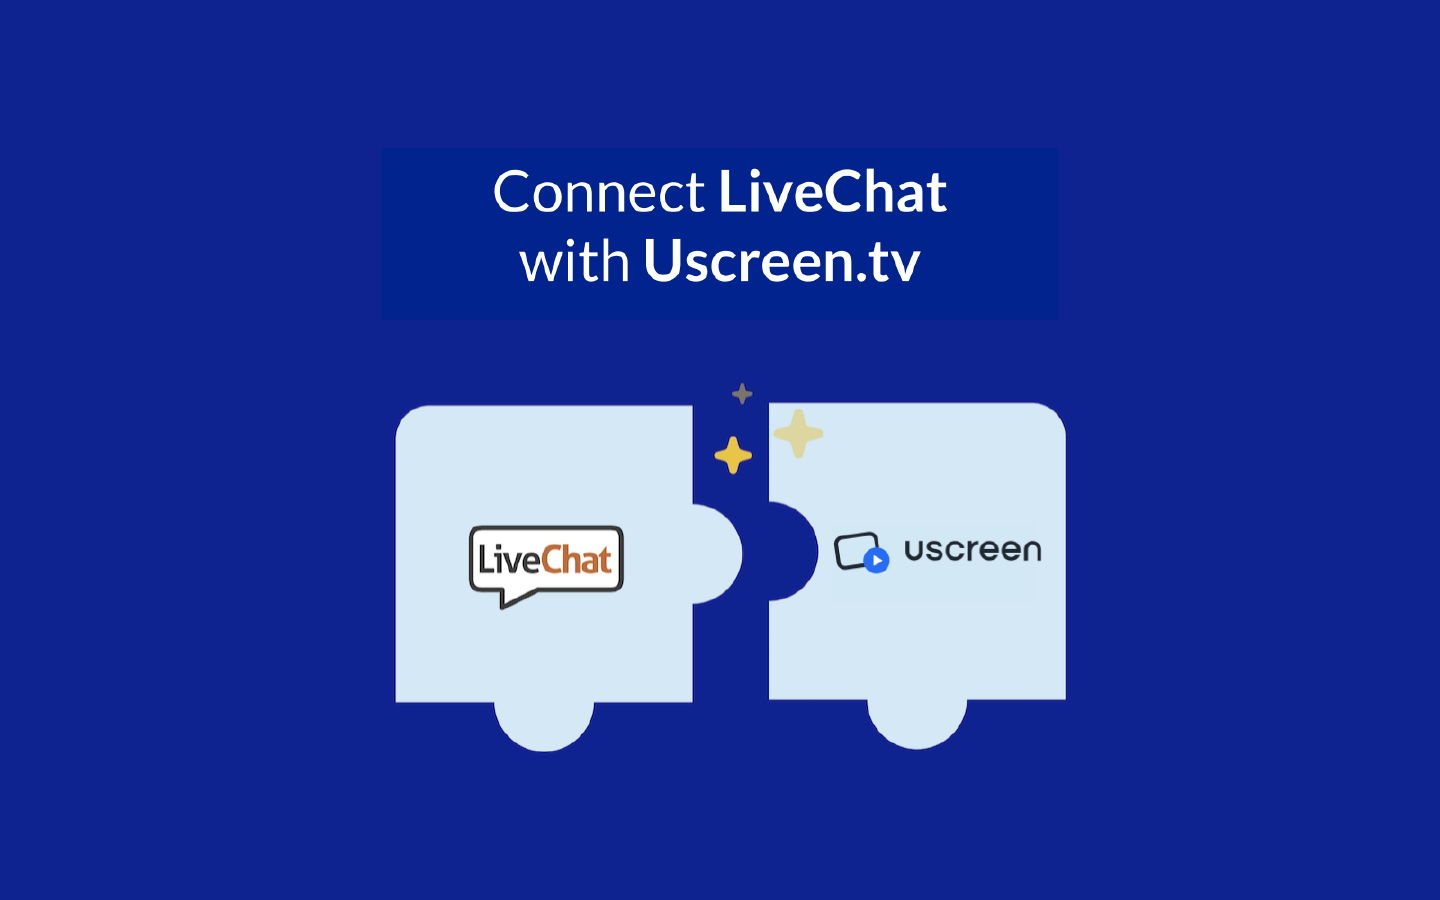 LiveChat integrates with Uscreen.tv